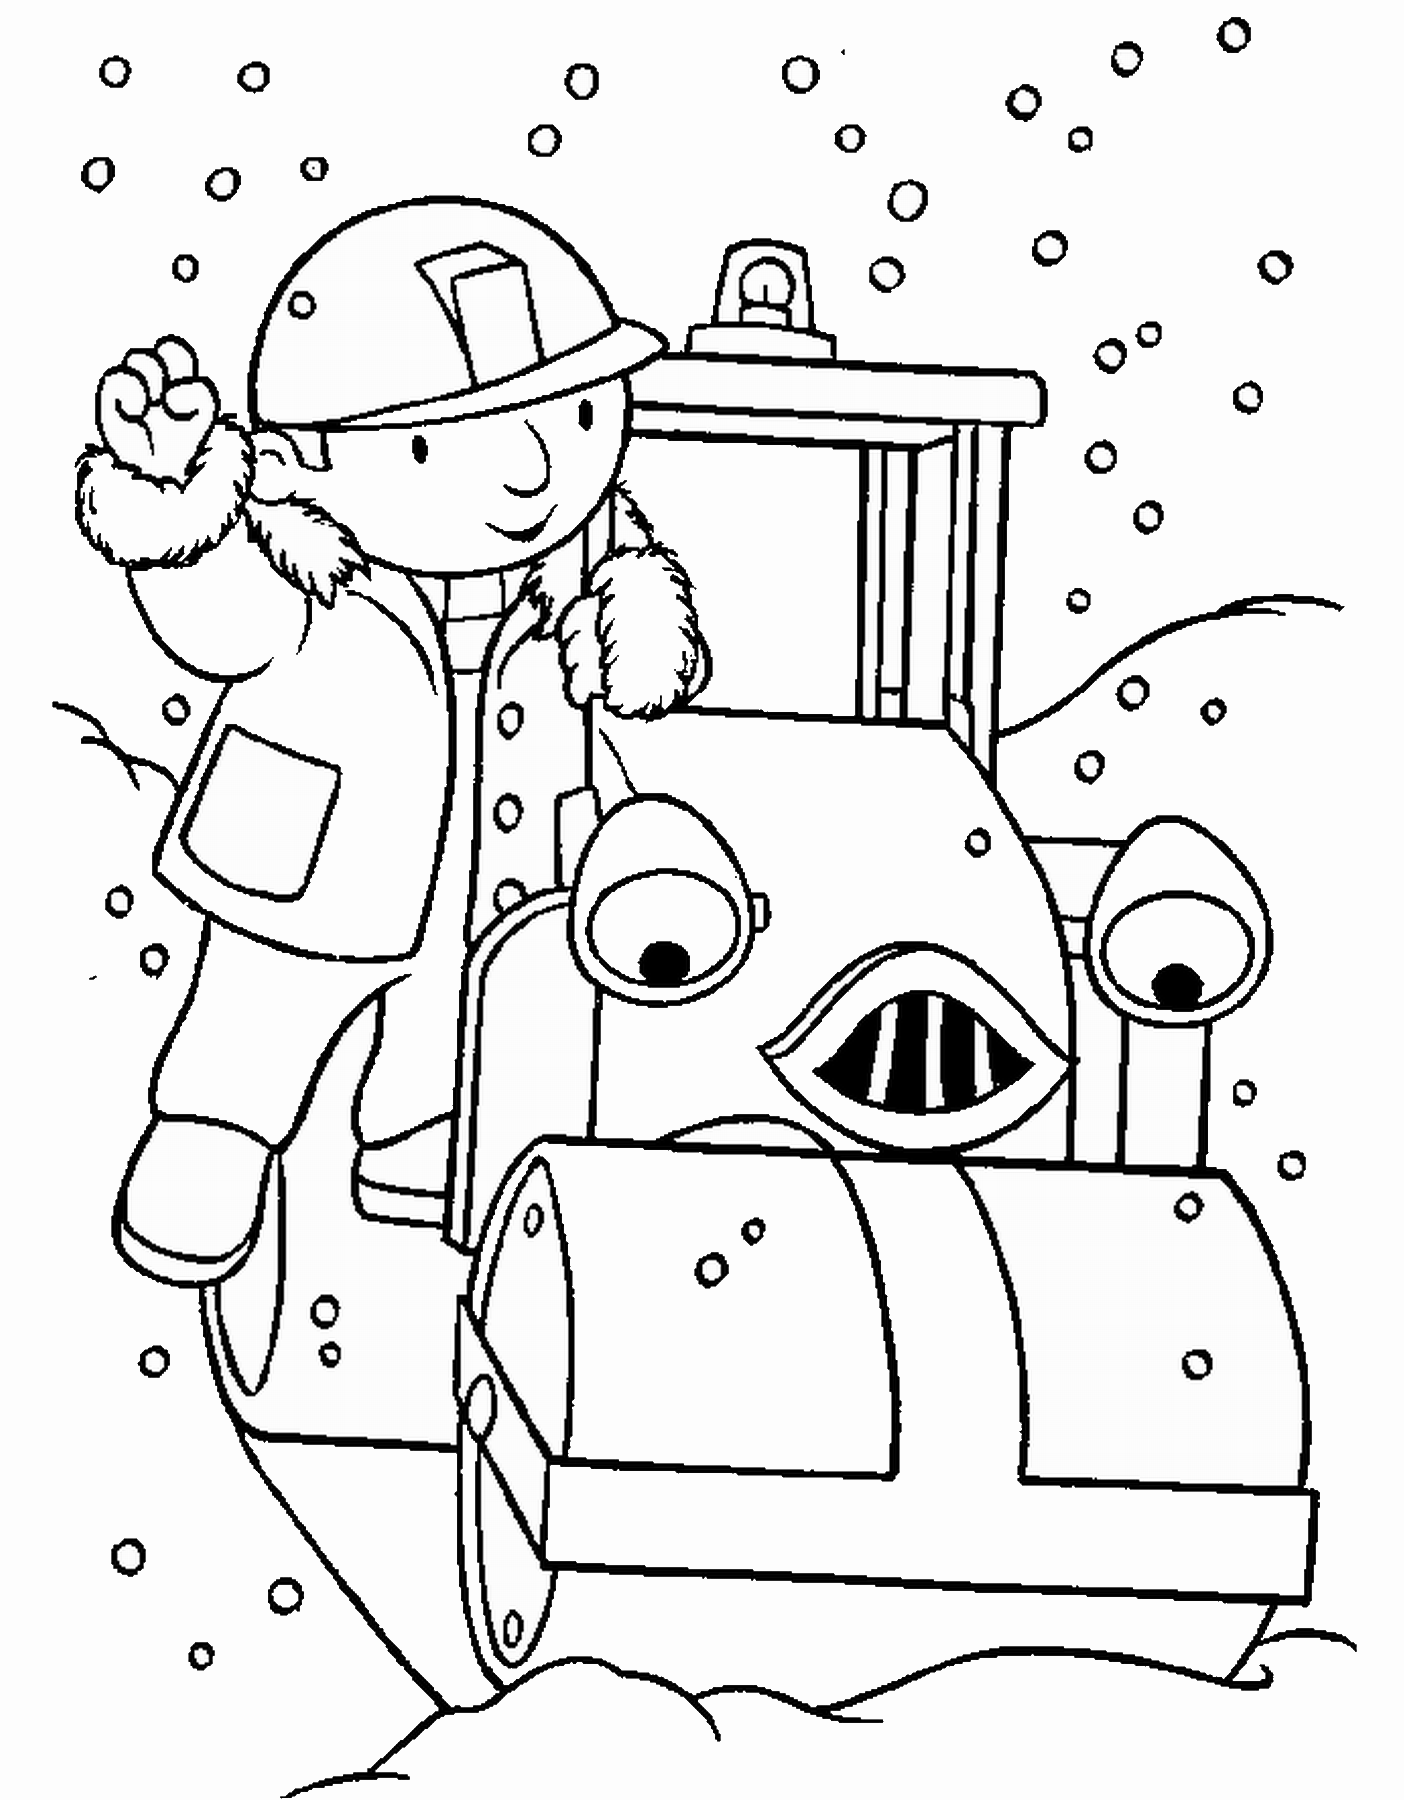 Bob the Builder Coloring Pages TV Film bob the builder_32 Printable 2020 00982 Coloring4free